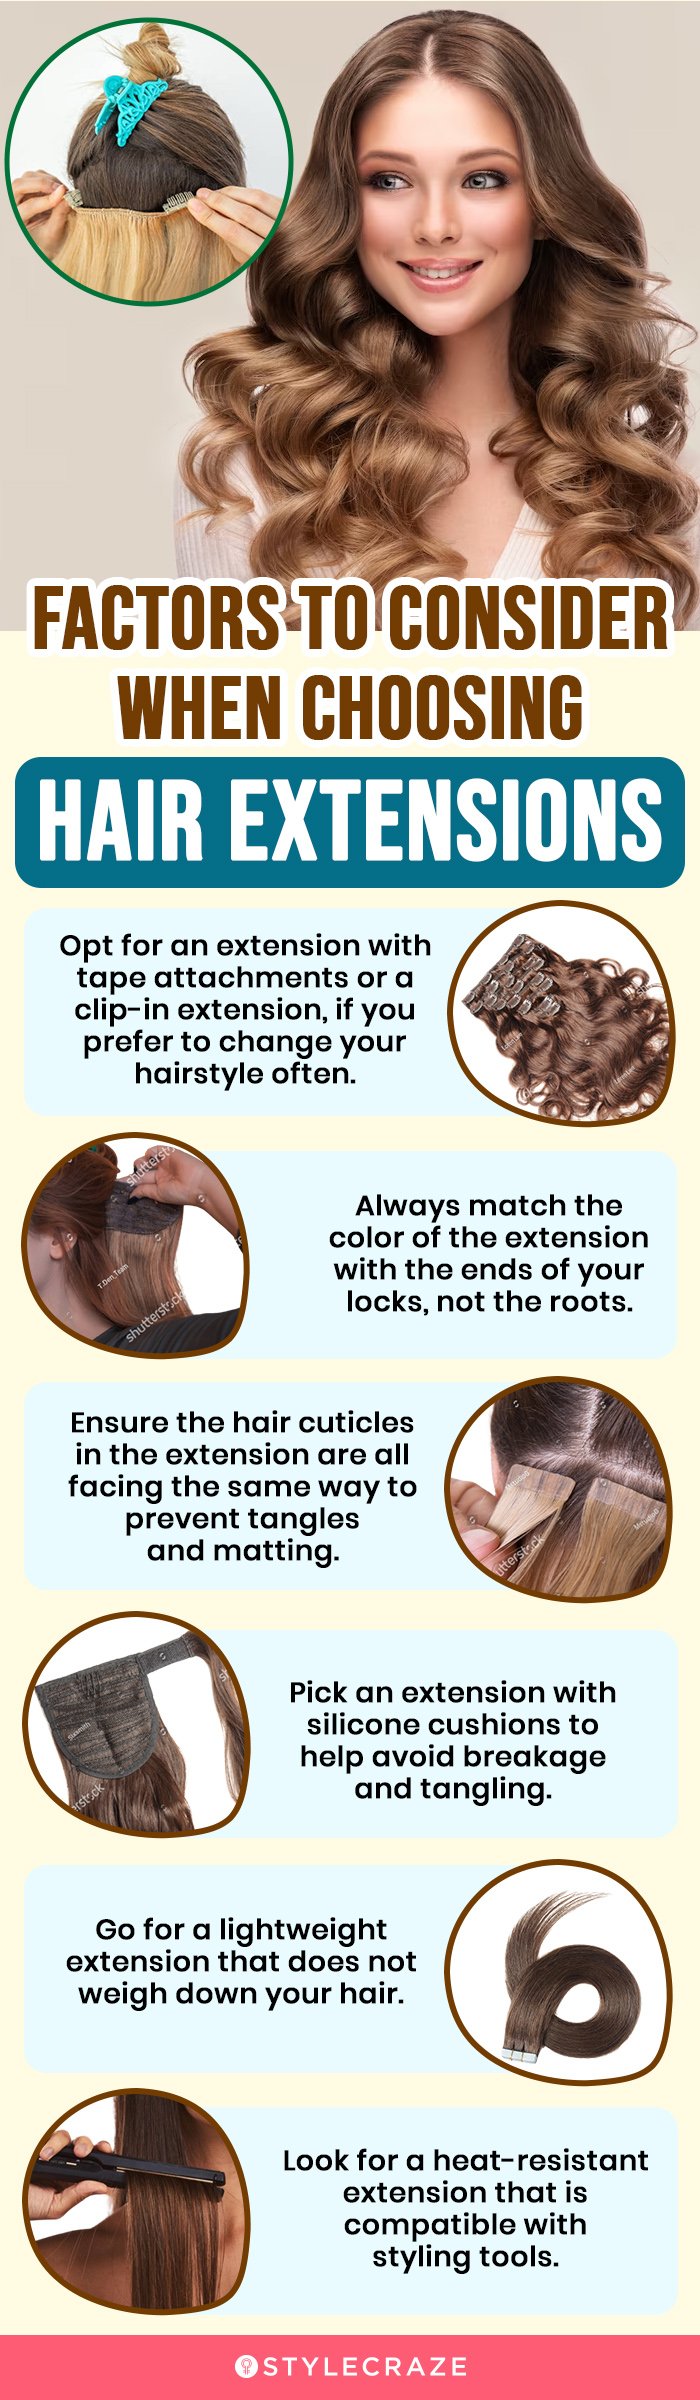 Factors To Consider When Choosing A Hair Extension (infographic)